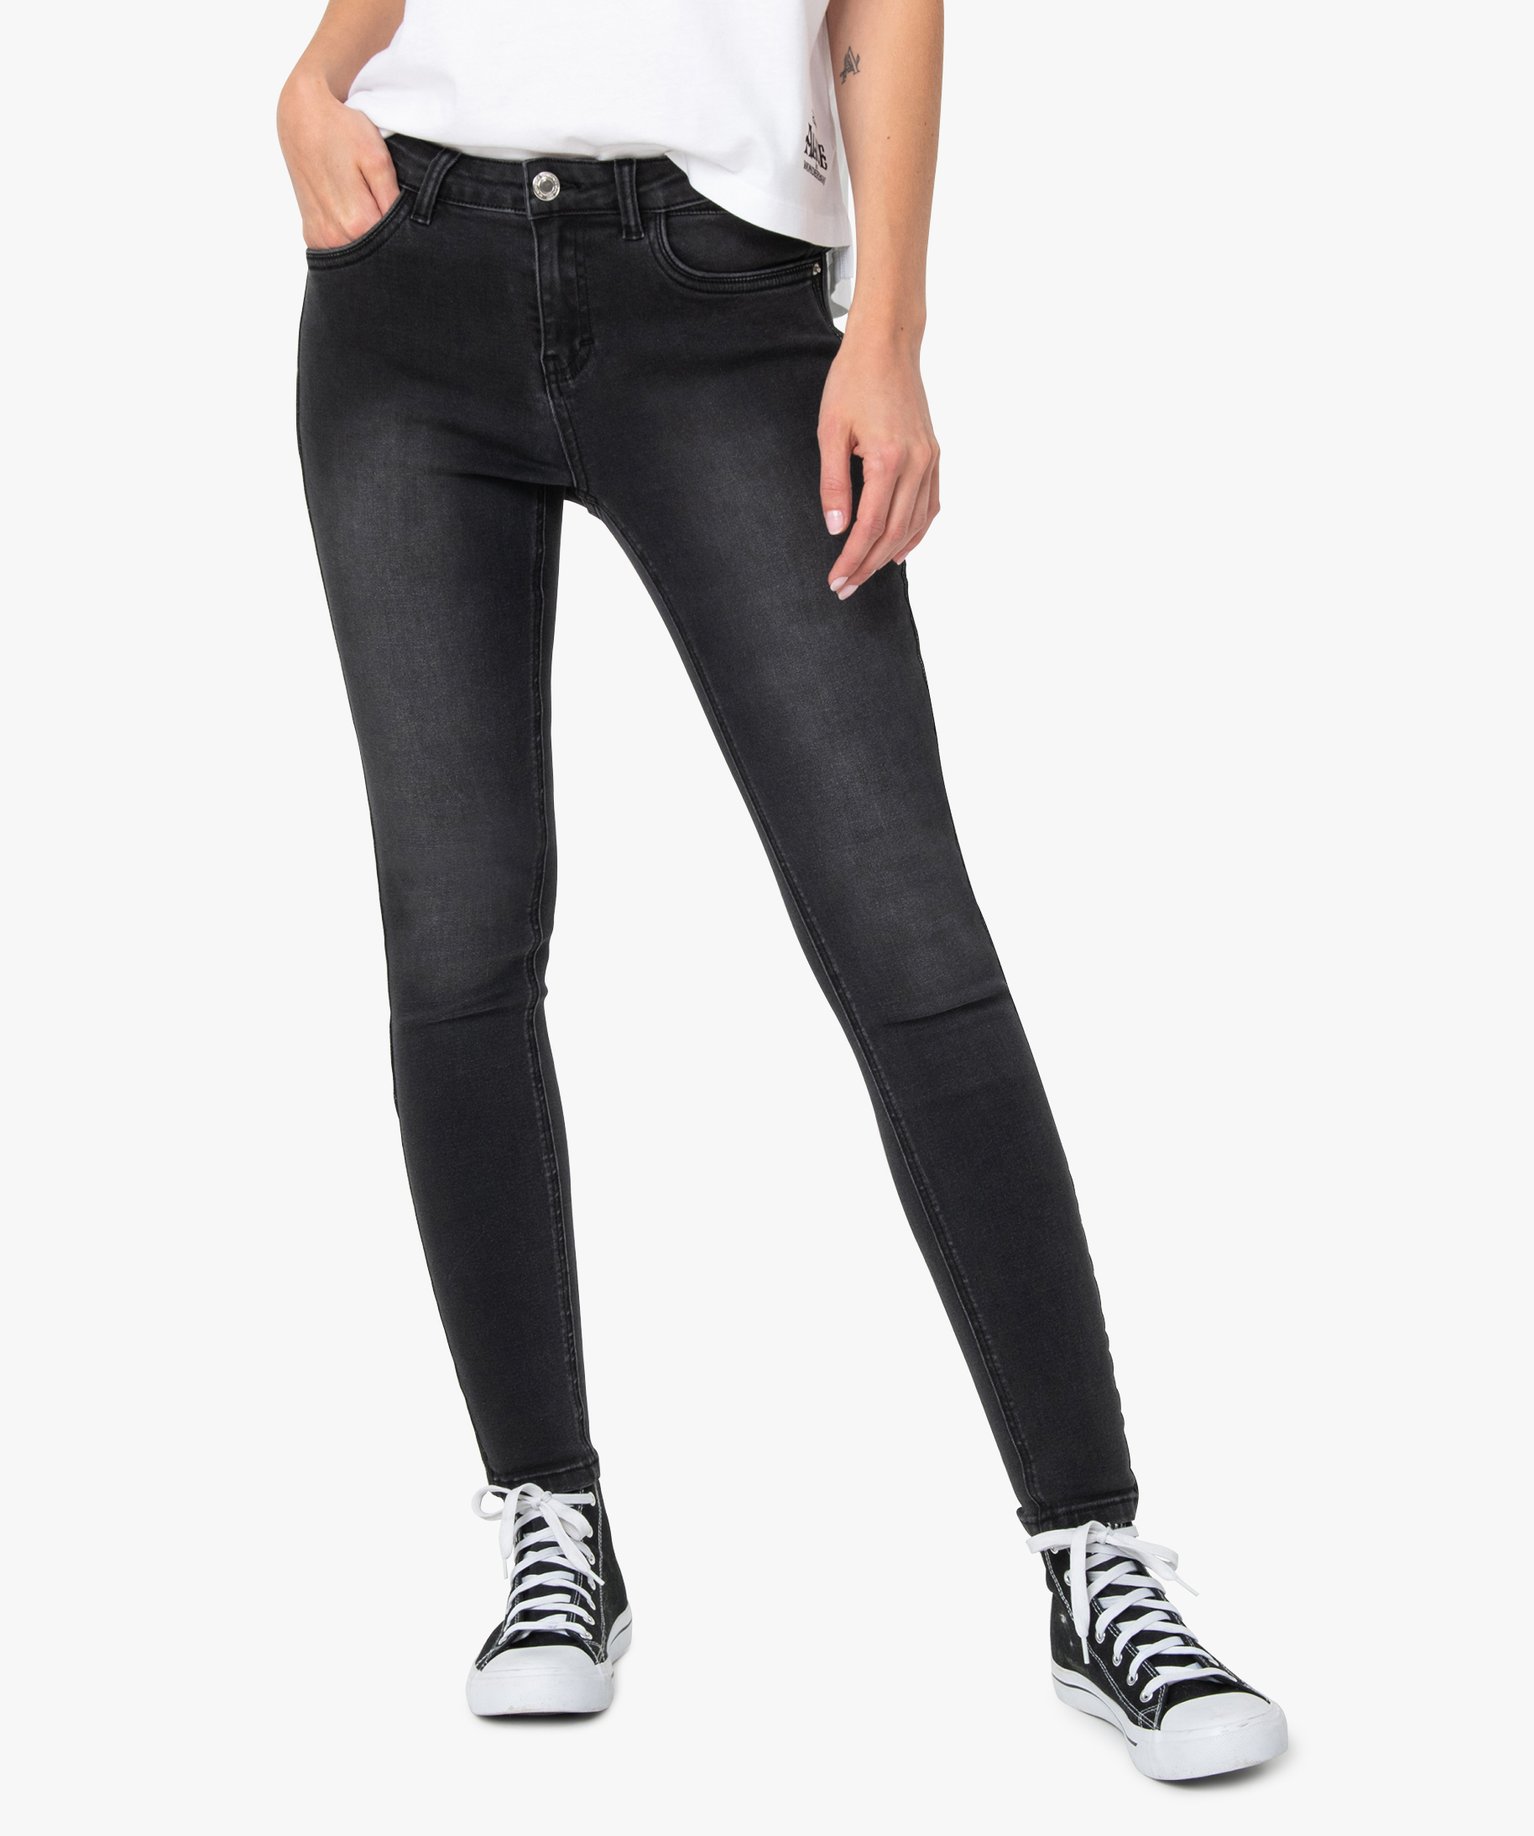 Jean fille coupe Skinny extensible Gemo Fille Vêtements Pantalons & Jeans Pantalons Pantalons Slim & Skinny 